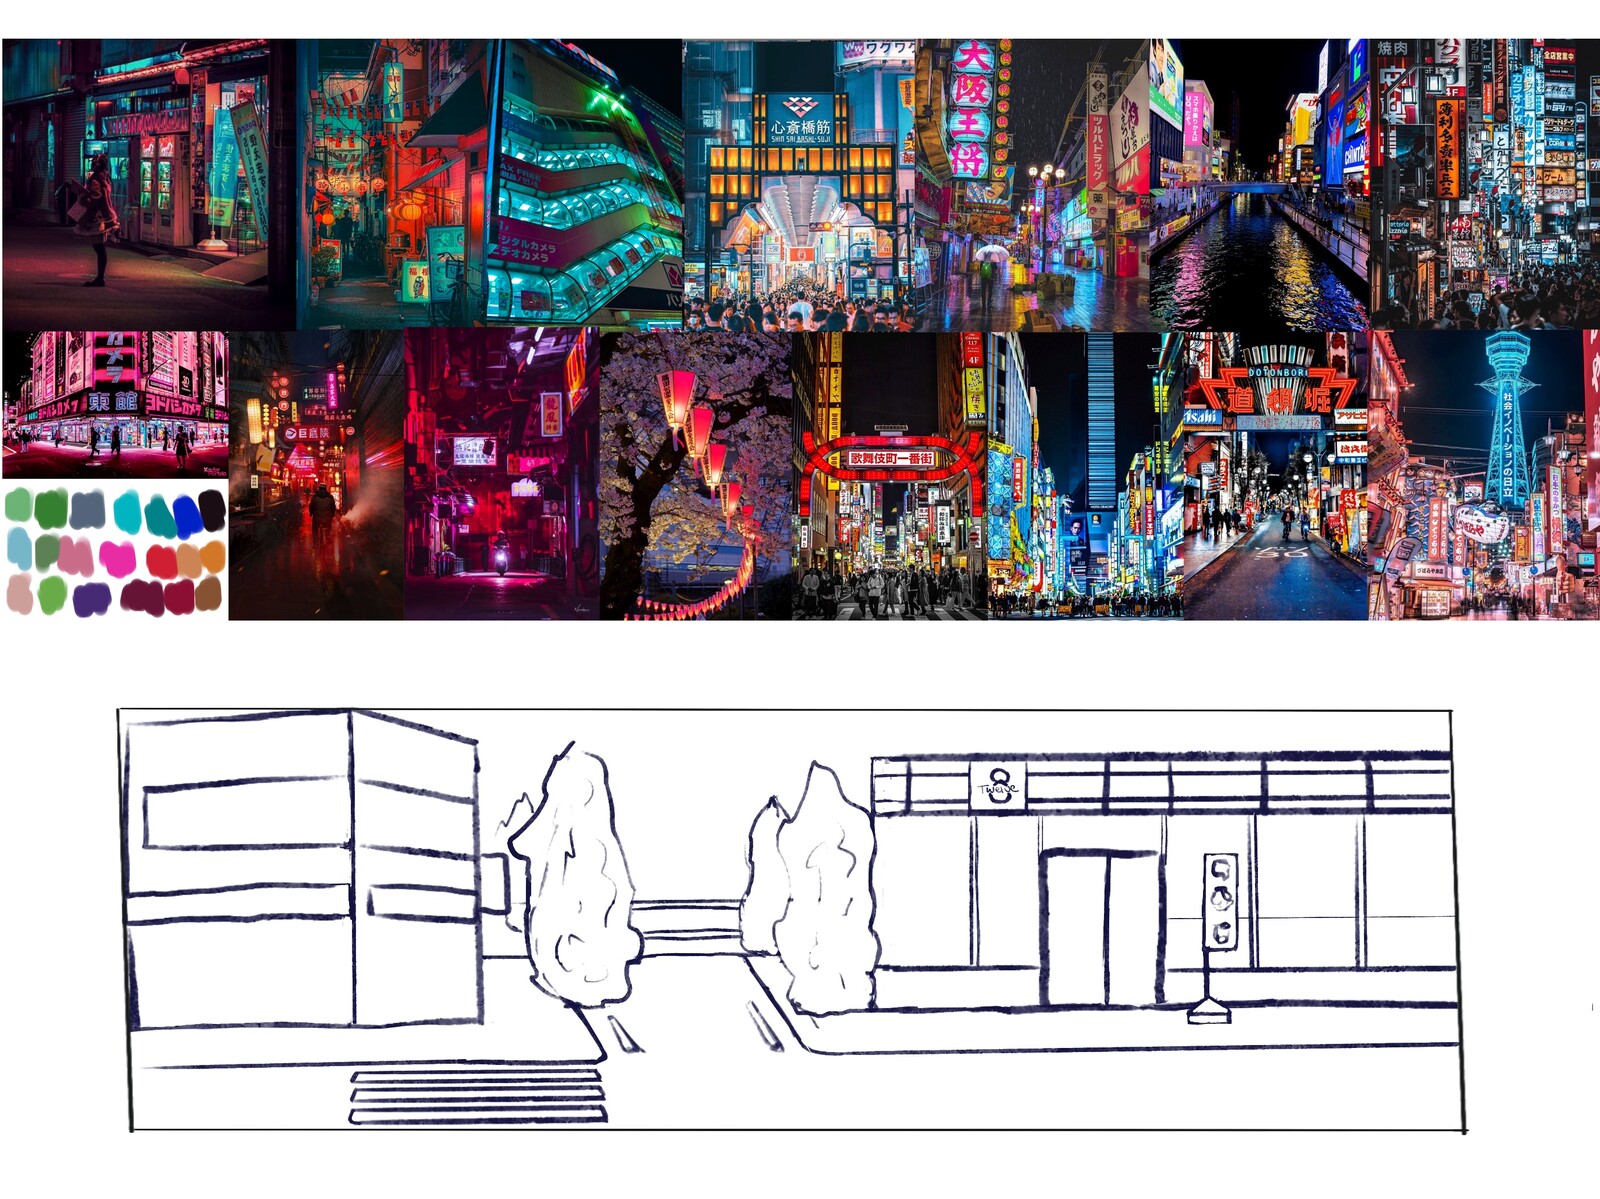 To start off, I created rough concepts for the side-scrolling environment that the game would take place in. I gathered many references that I felt suited the neon-light city aesthetic we wanted. 